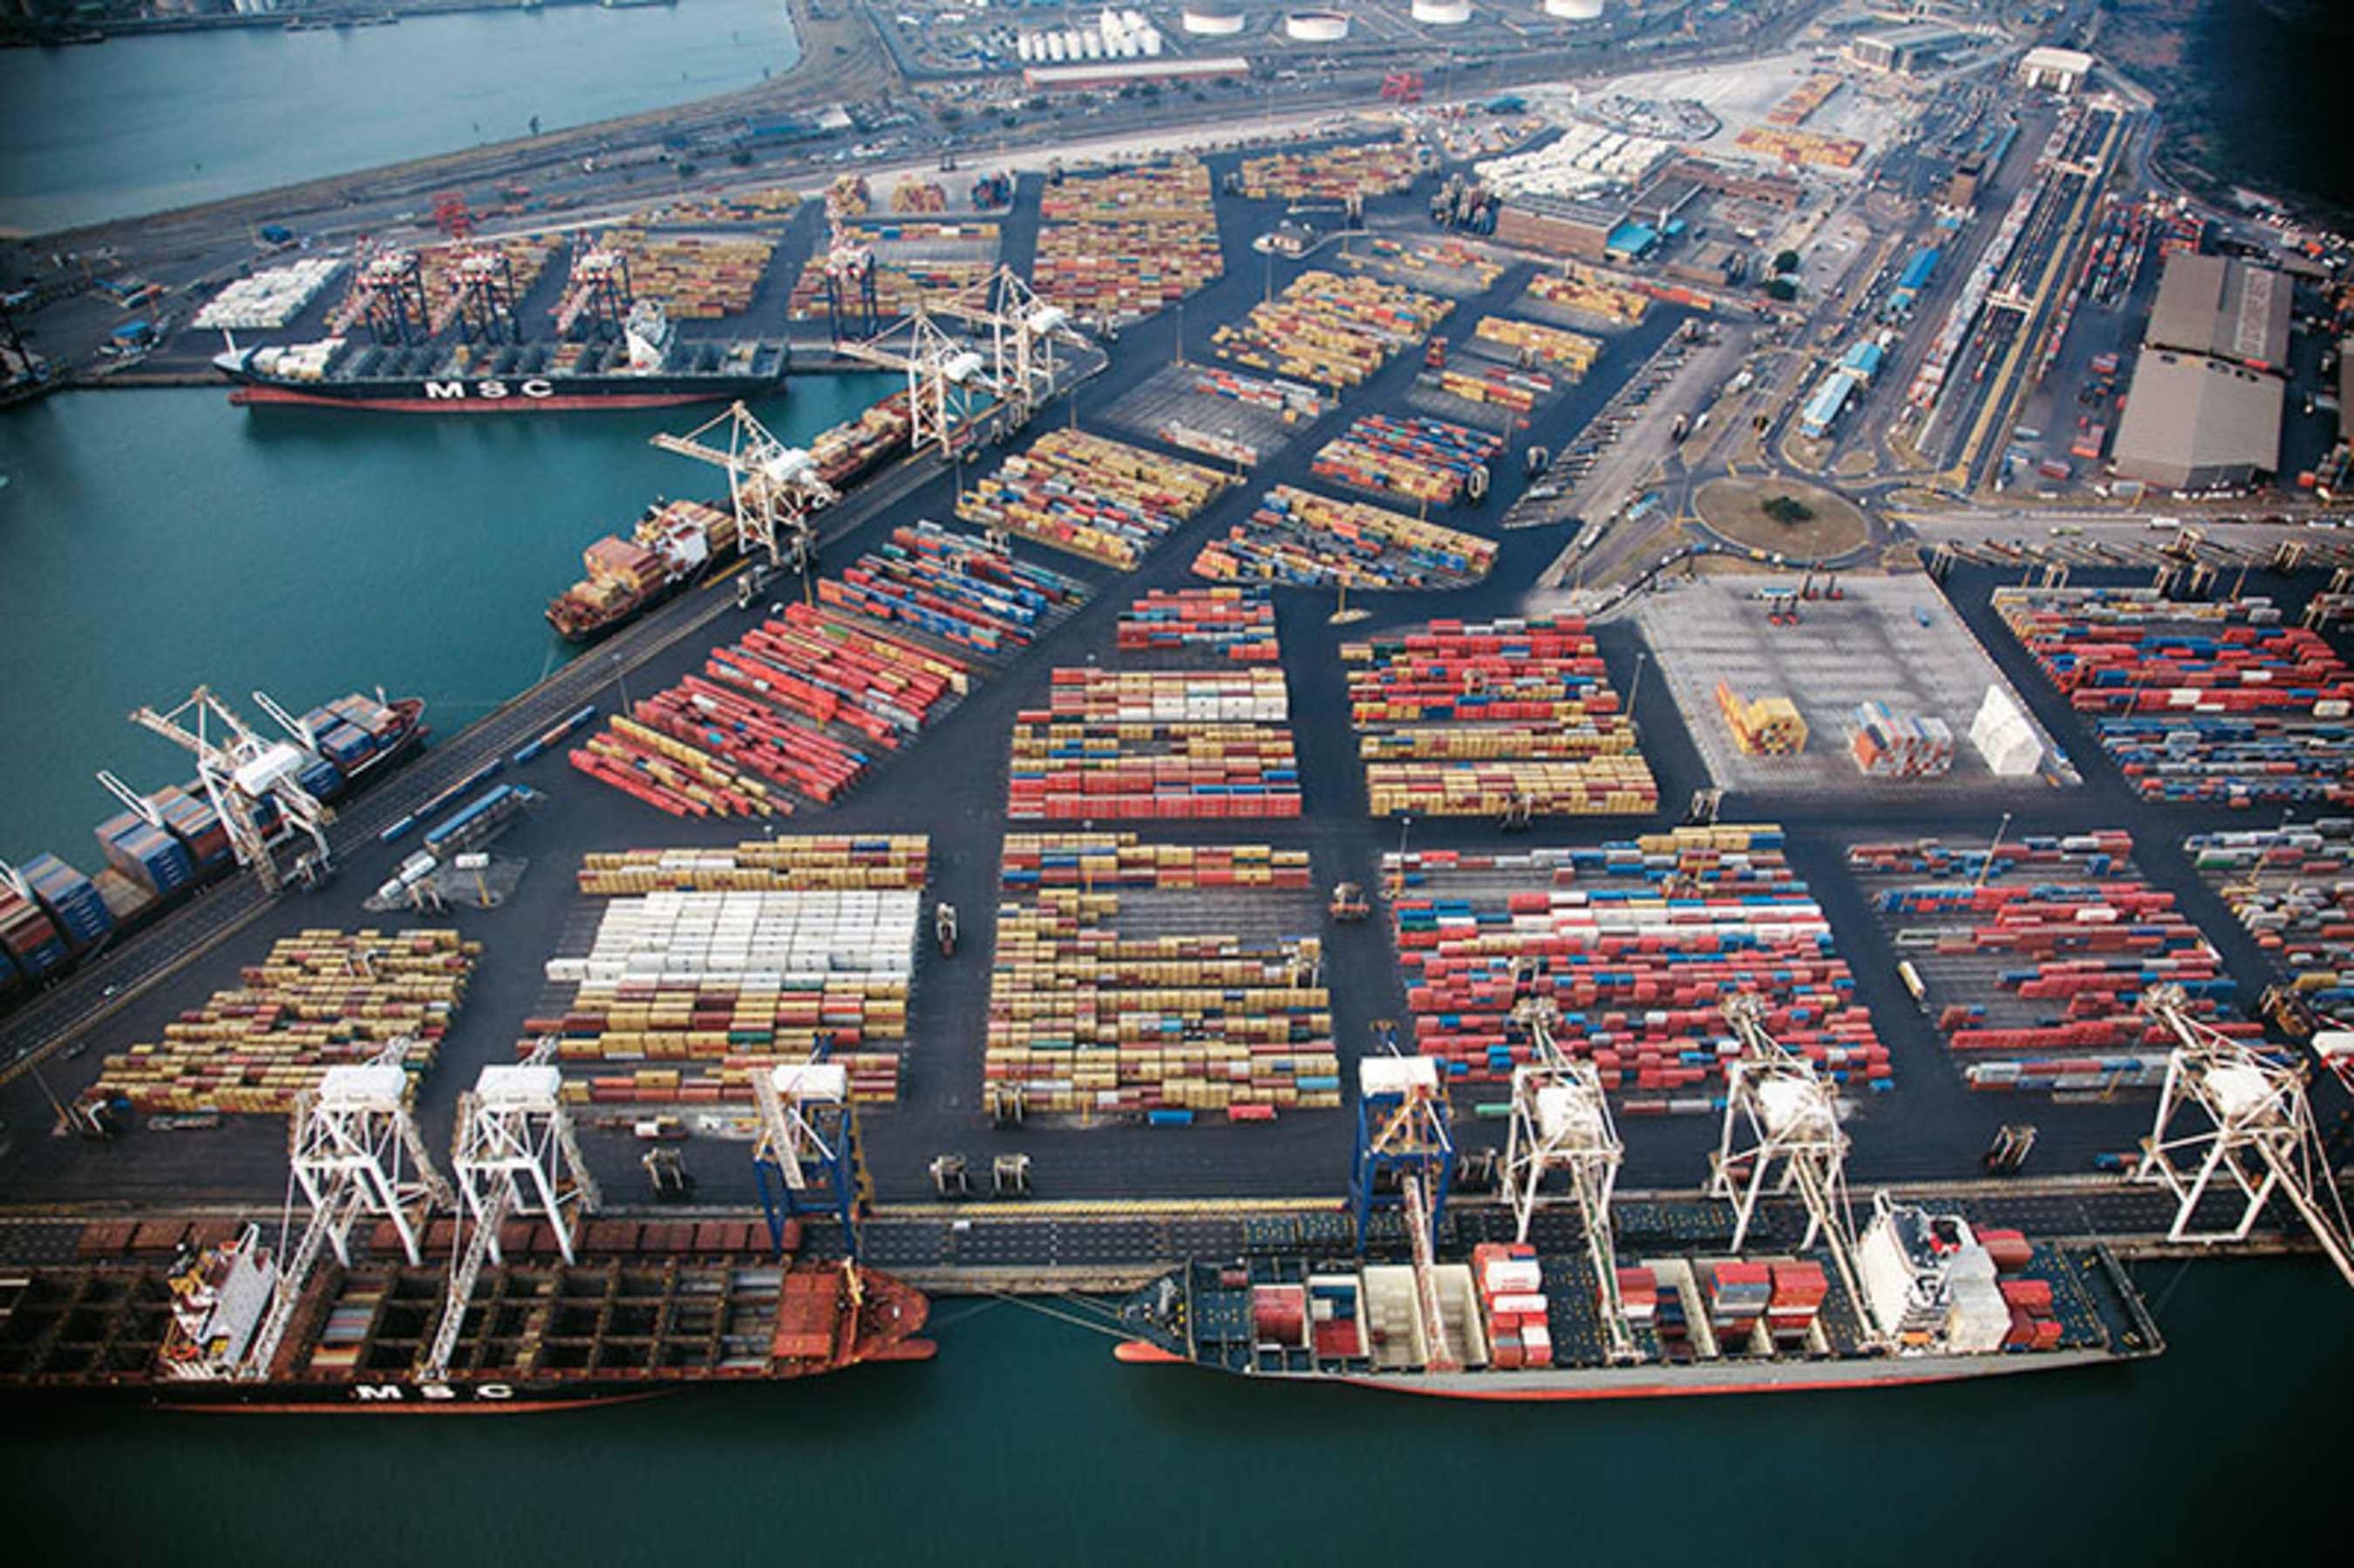 The Port of Durban, South Africa handles more than 80 million tons of cargo each year. Durban is the continent's largest and busiest container terminal.